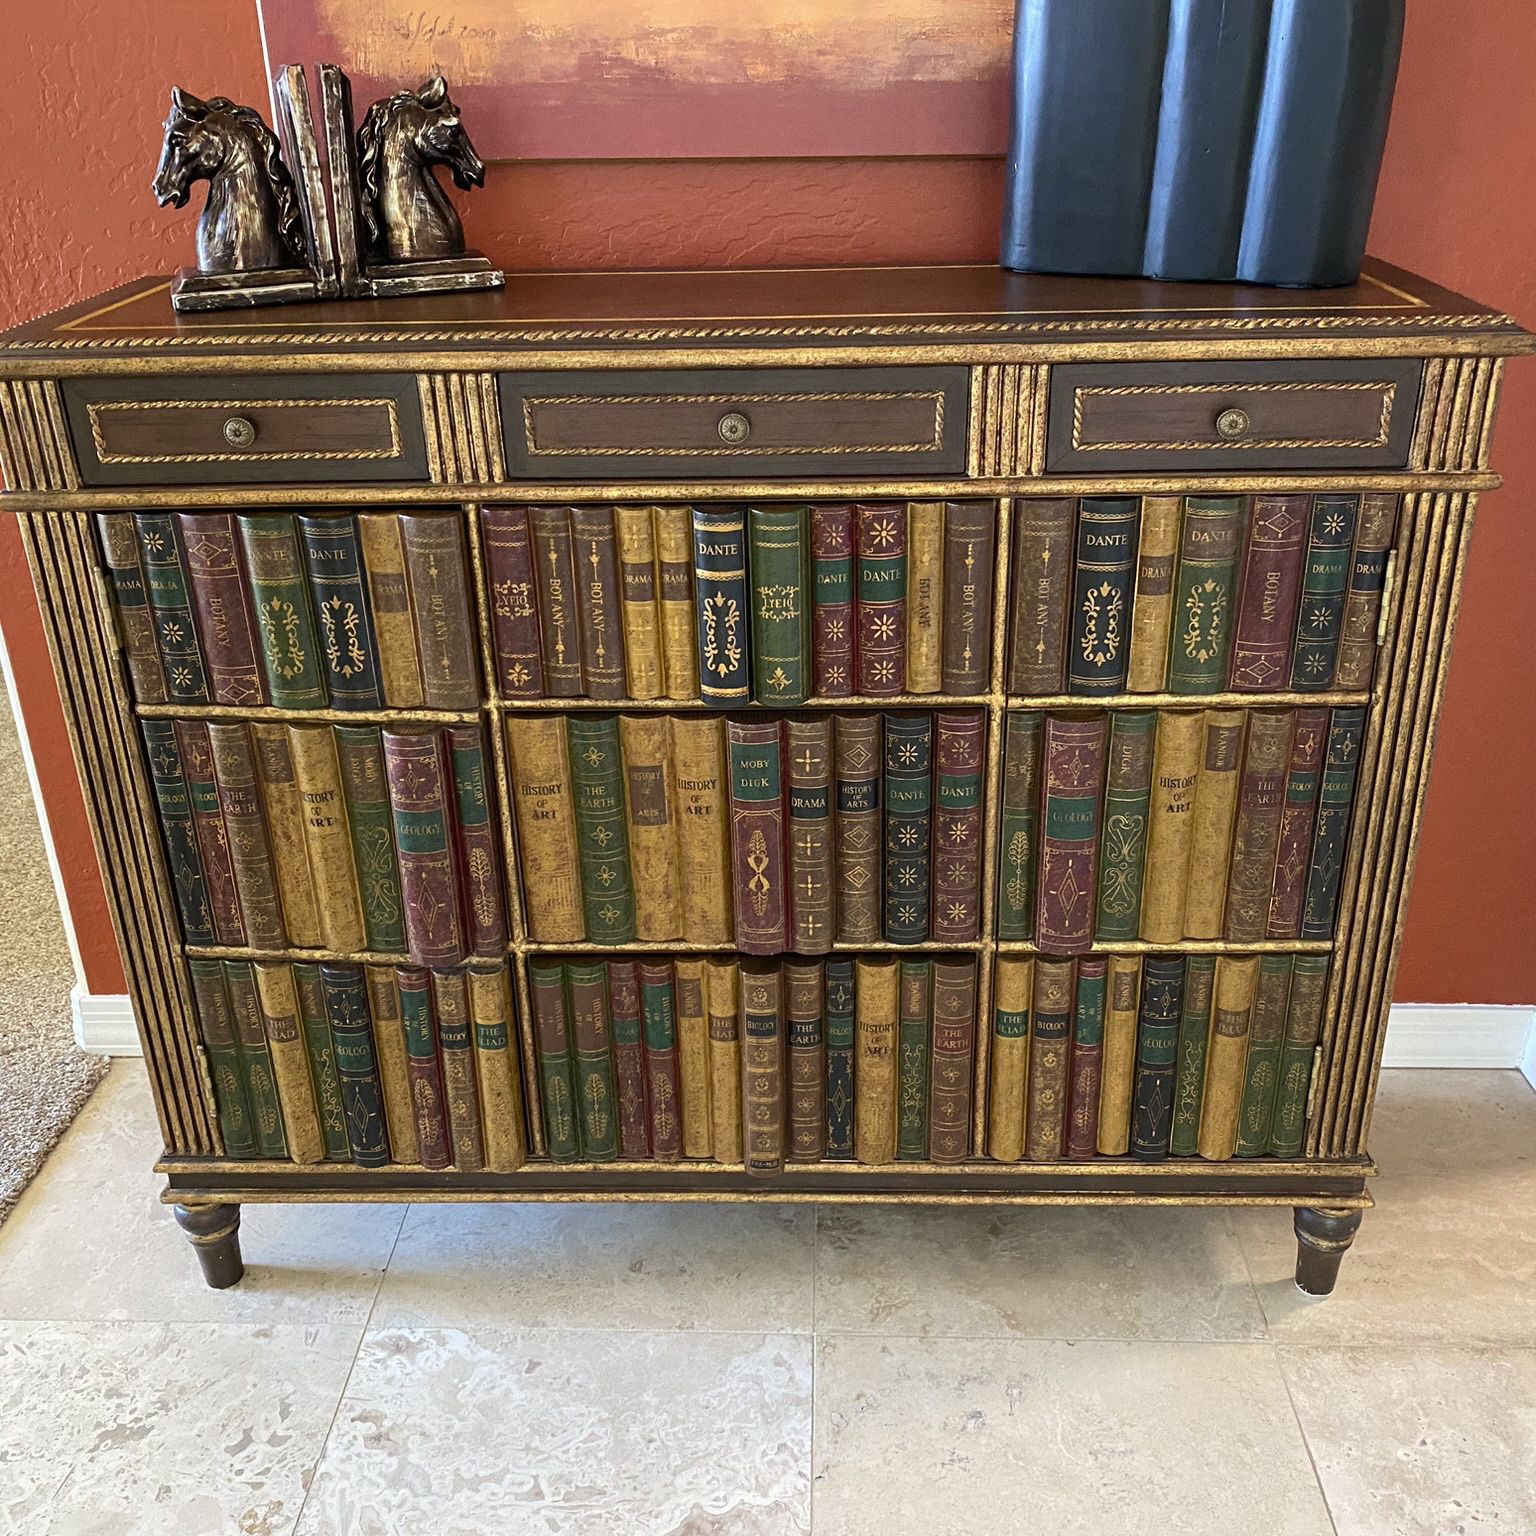 Antiqued Library Cabinet